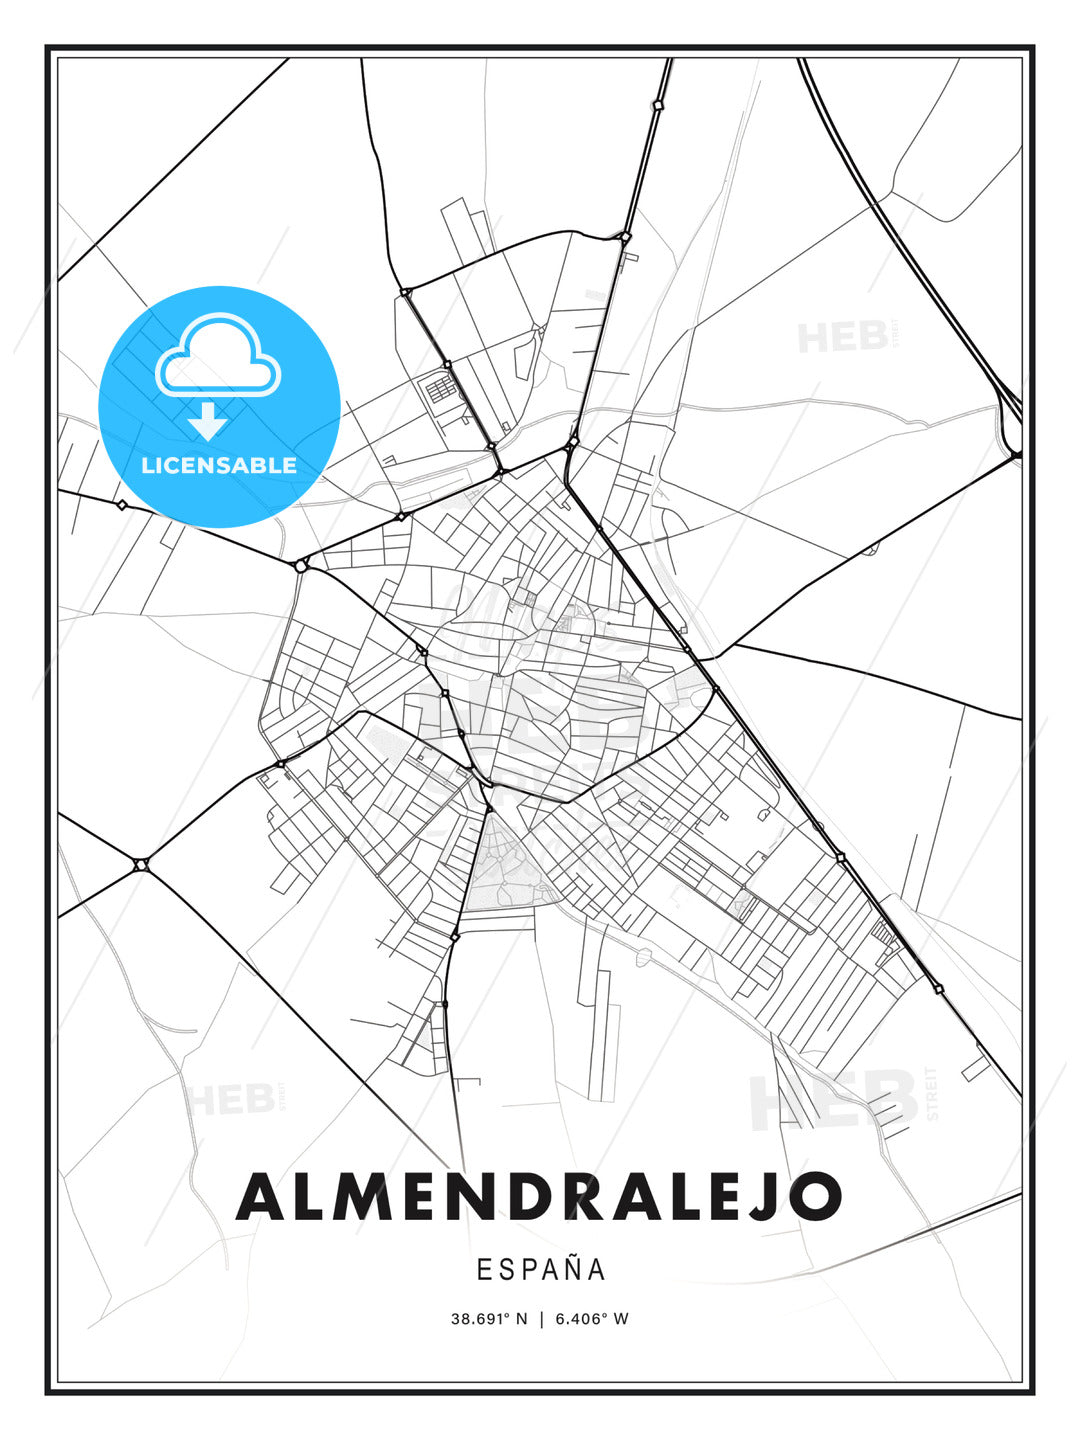 Almendralejo, Spain, Modern Print Template in Various Formats - HEBSTREITS Sketches